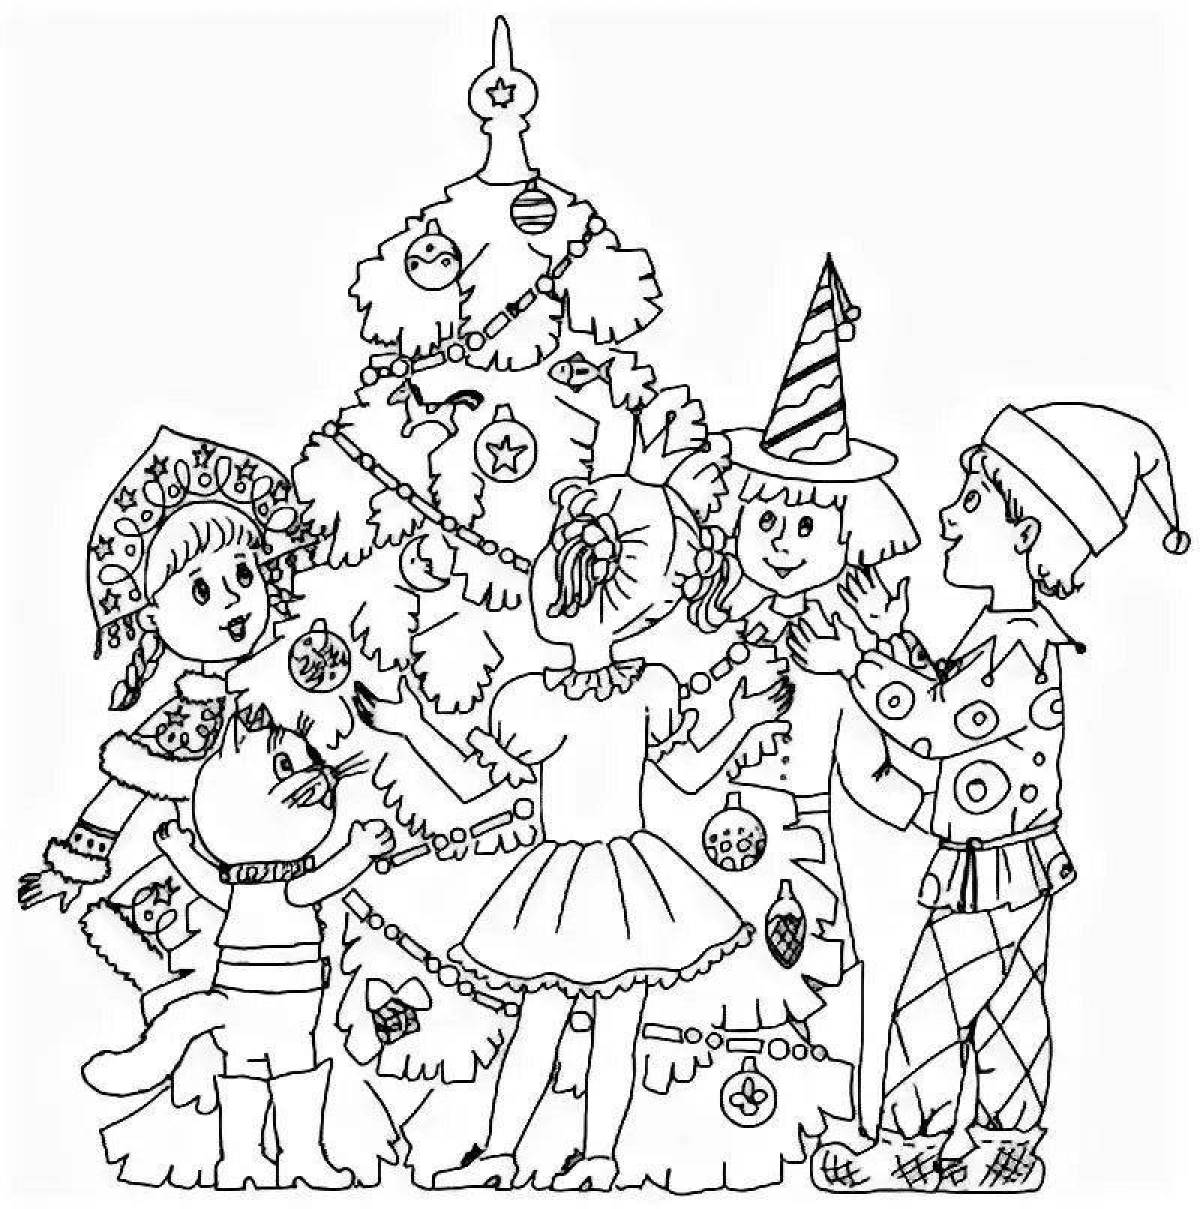 Coloring page splendid round dance